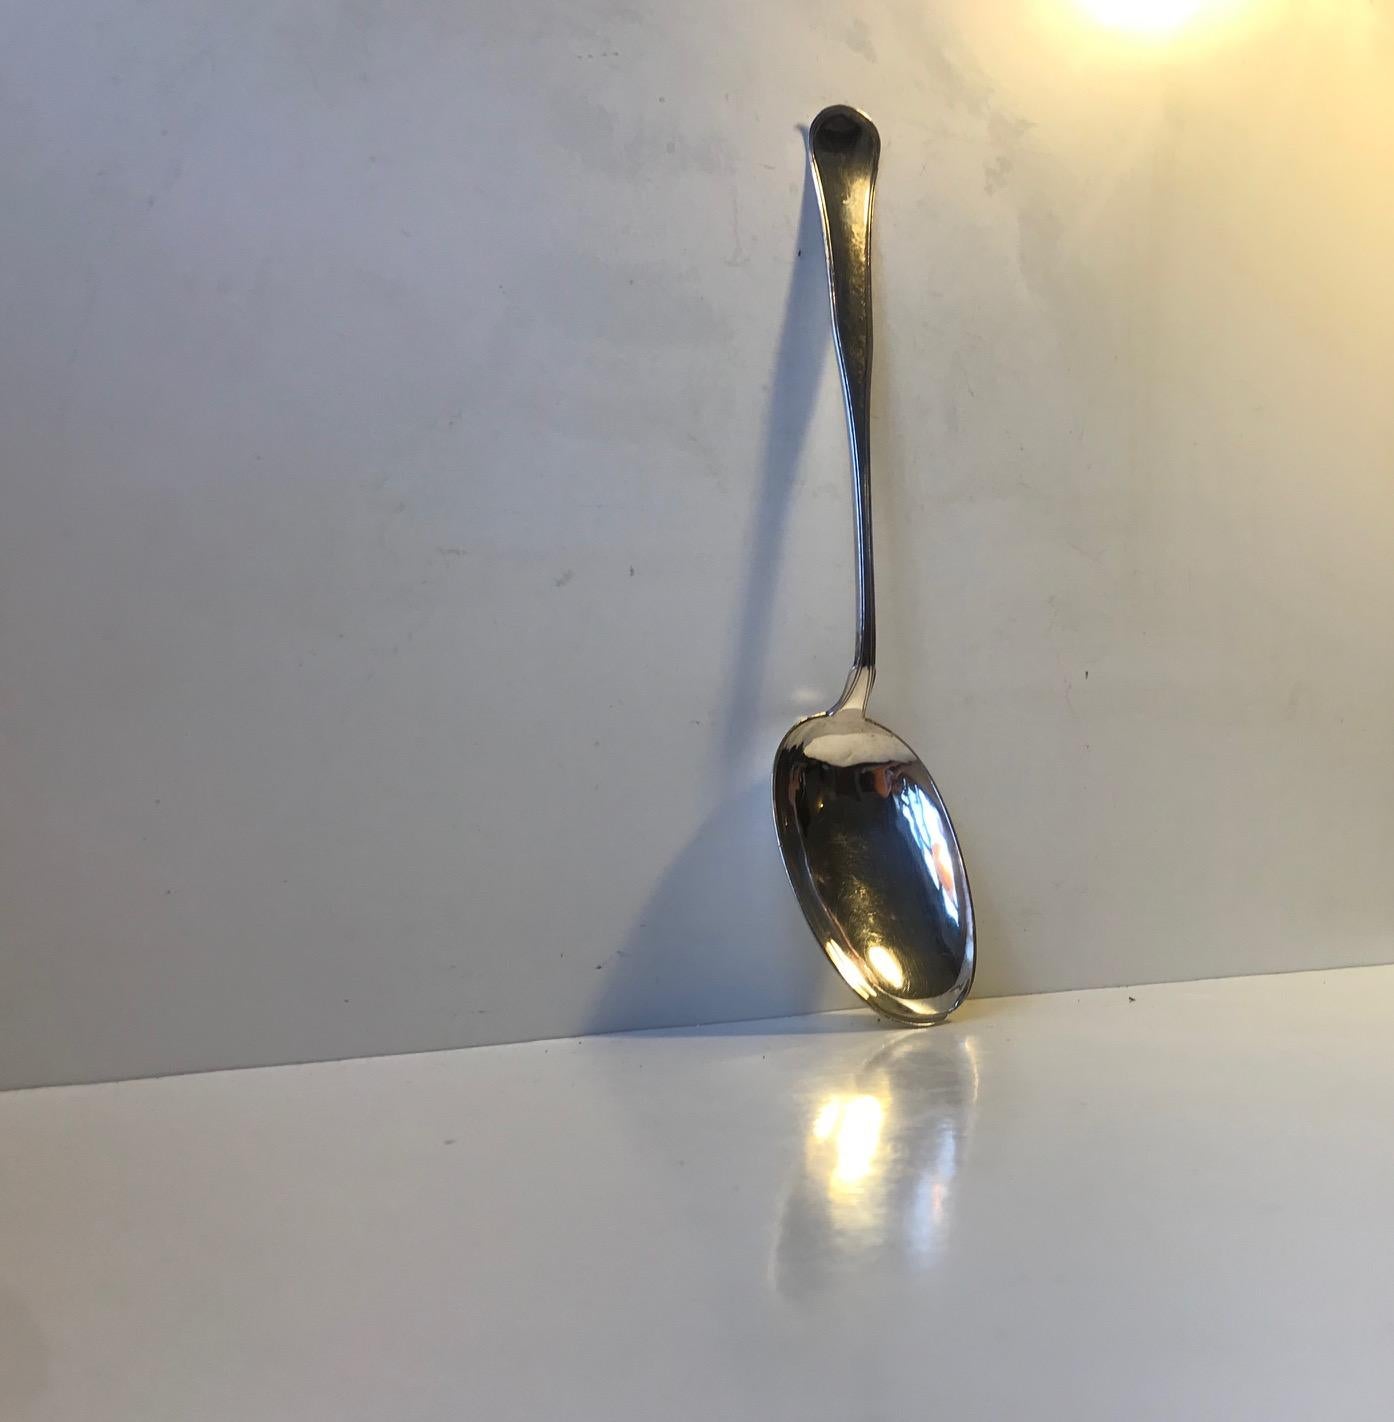 Large serving spoon in silver. Length: approx. 33 cm (12.5 inch). Weight: 113 grams. Plain design. Hallmarked sterling silver with the 3 Towers of Copenhagen. Designed and manufactured by Funck in the late 19th century Denmark. Fully hallmarked to